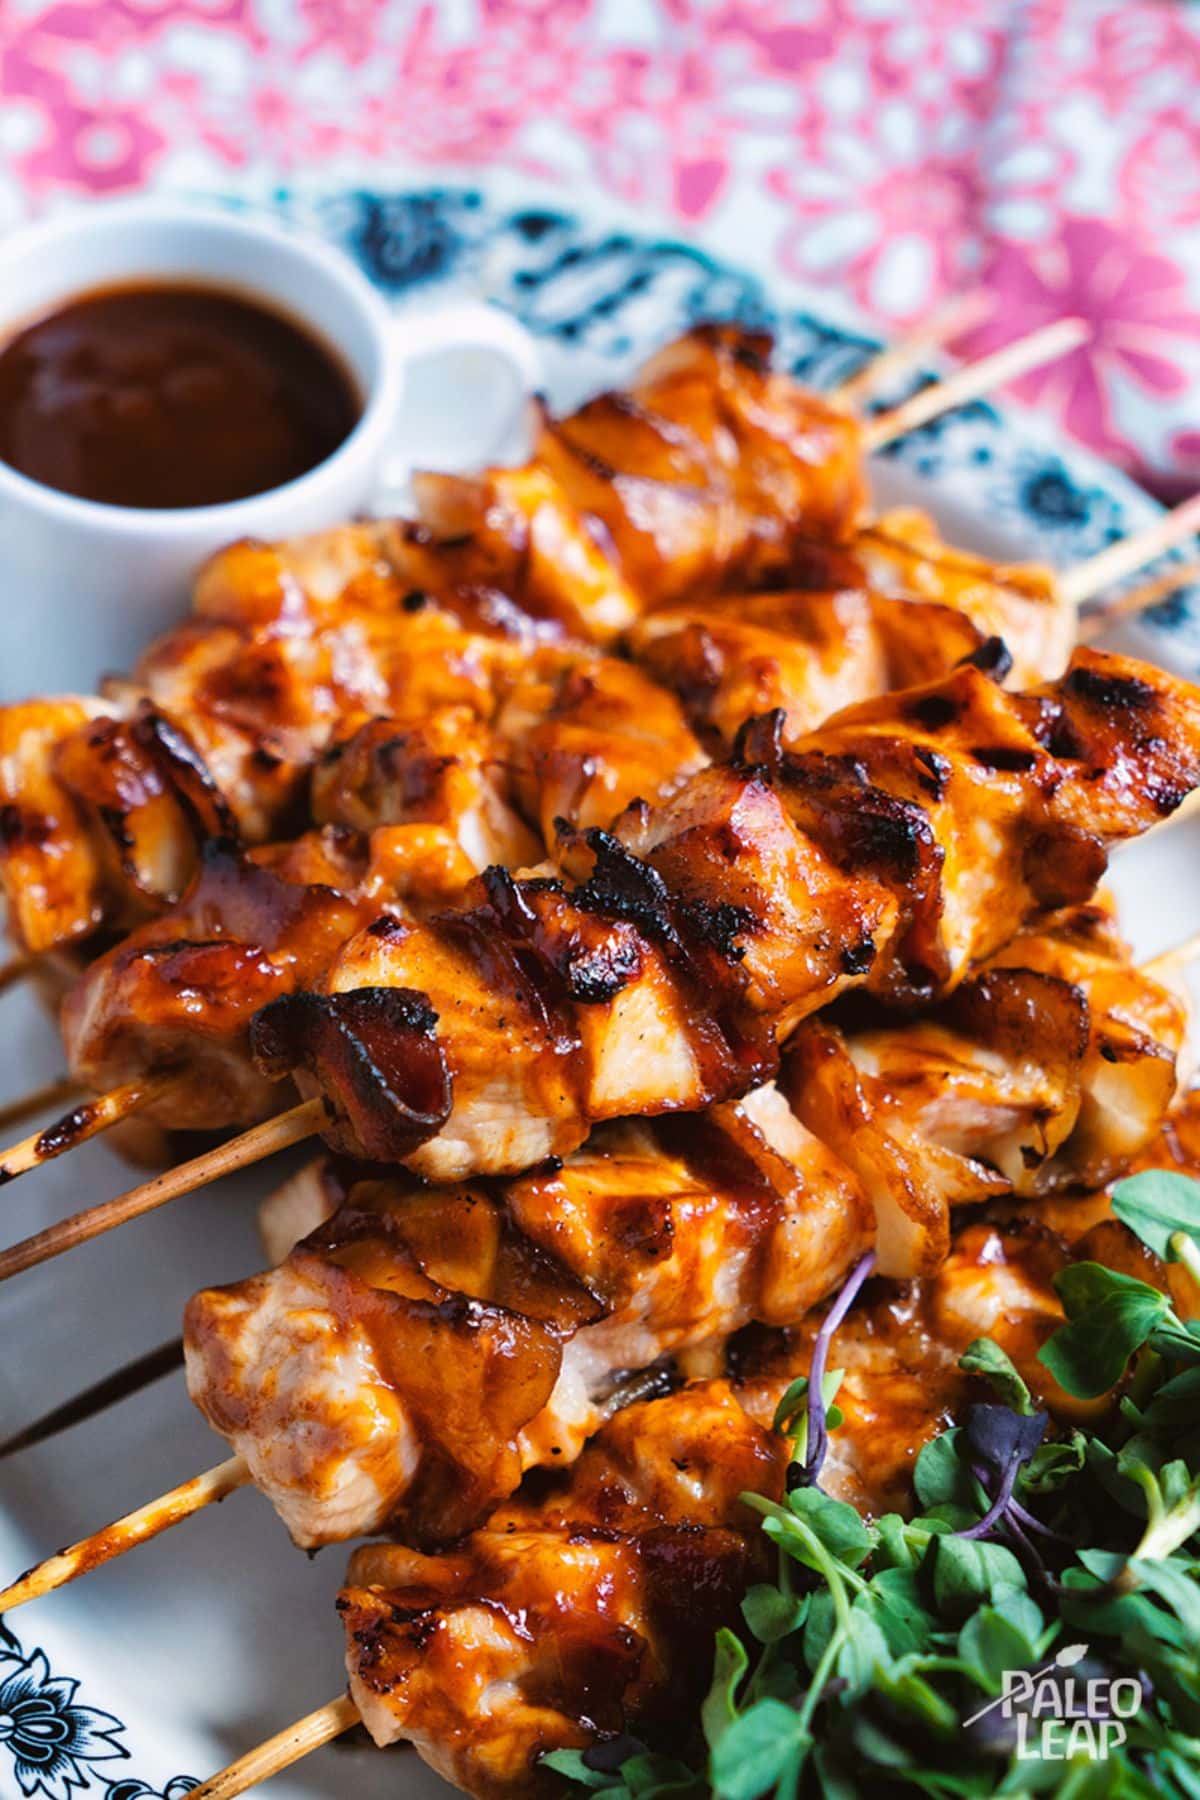 BBQ Chicken And Bacon Skewers on a tray.